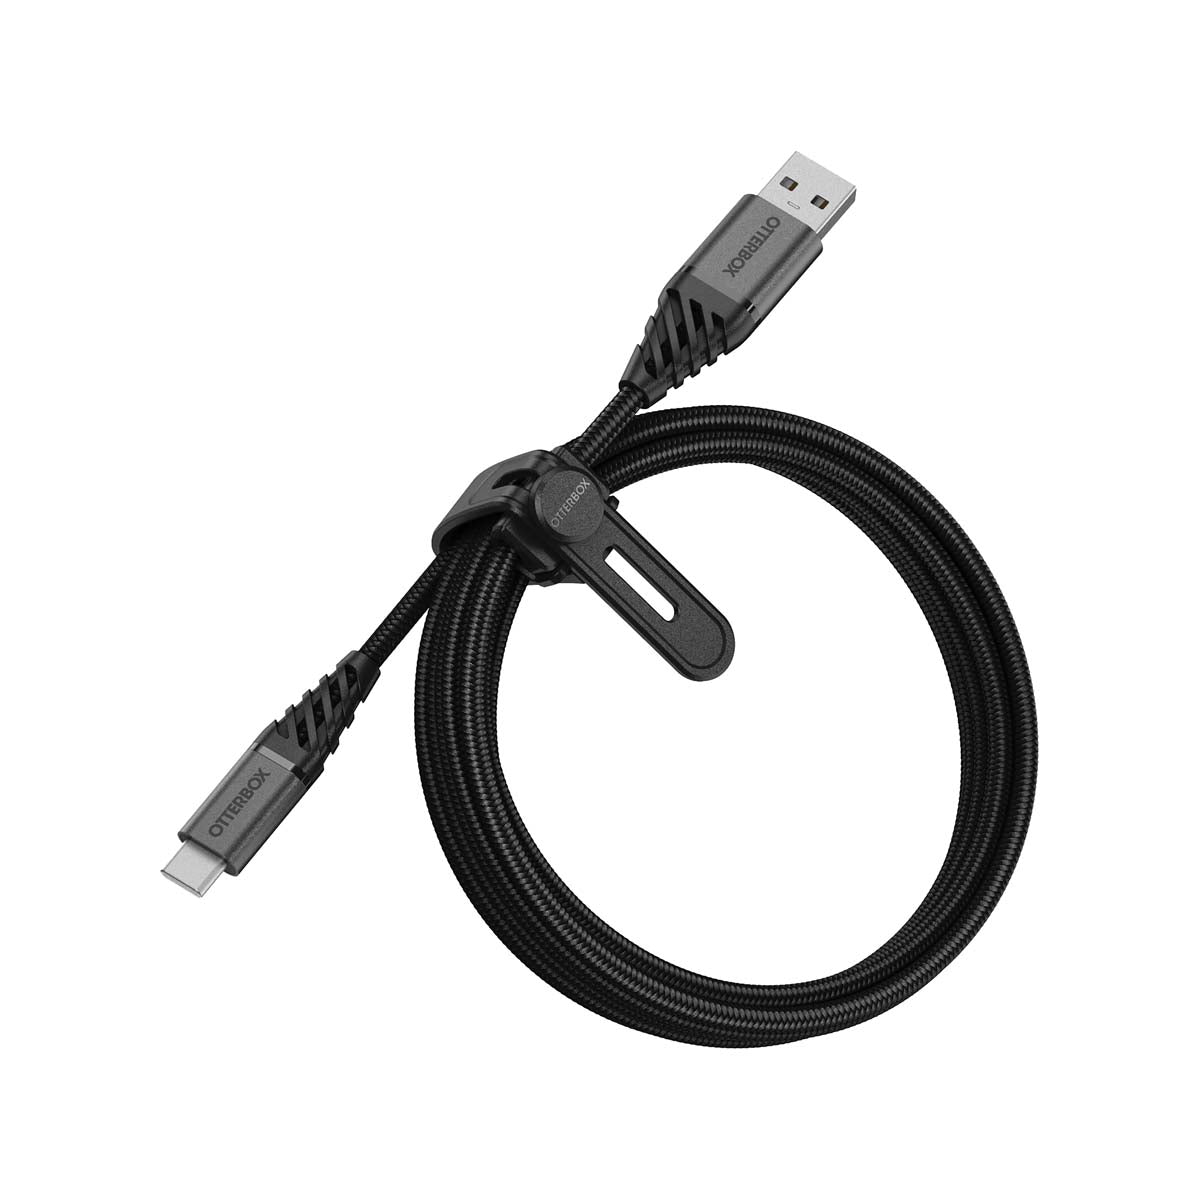 Otterbox Premium USB-C to USB-A 2 Meter Cable.